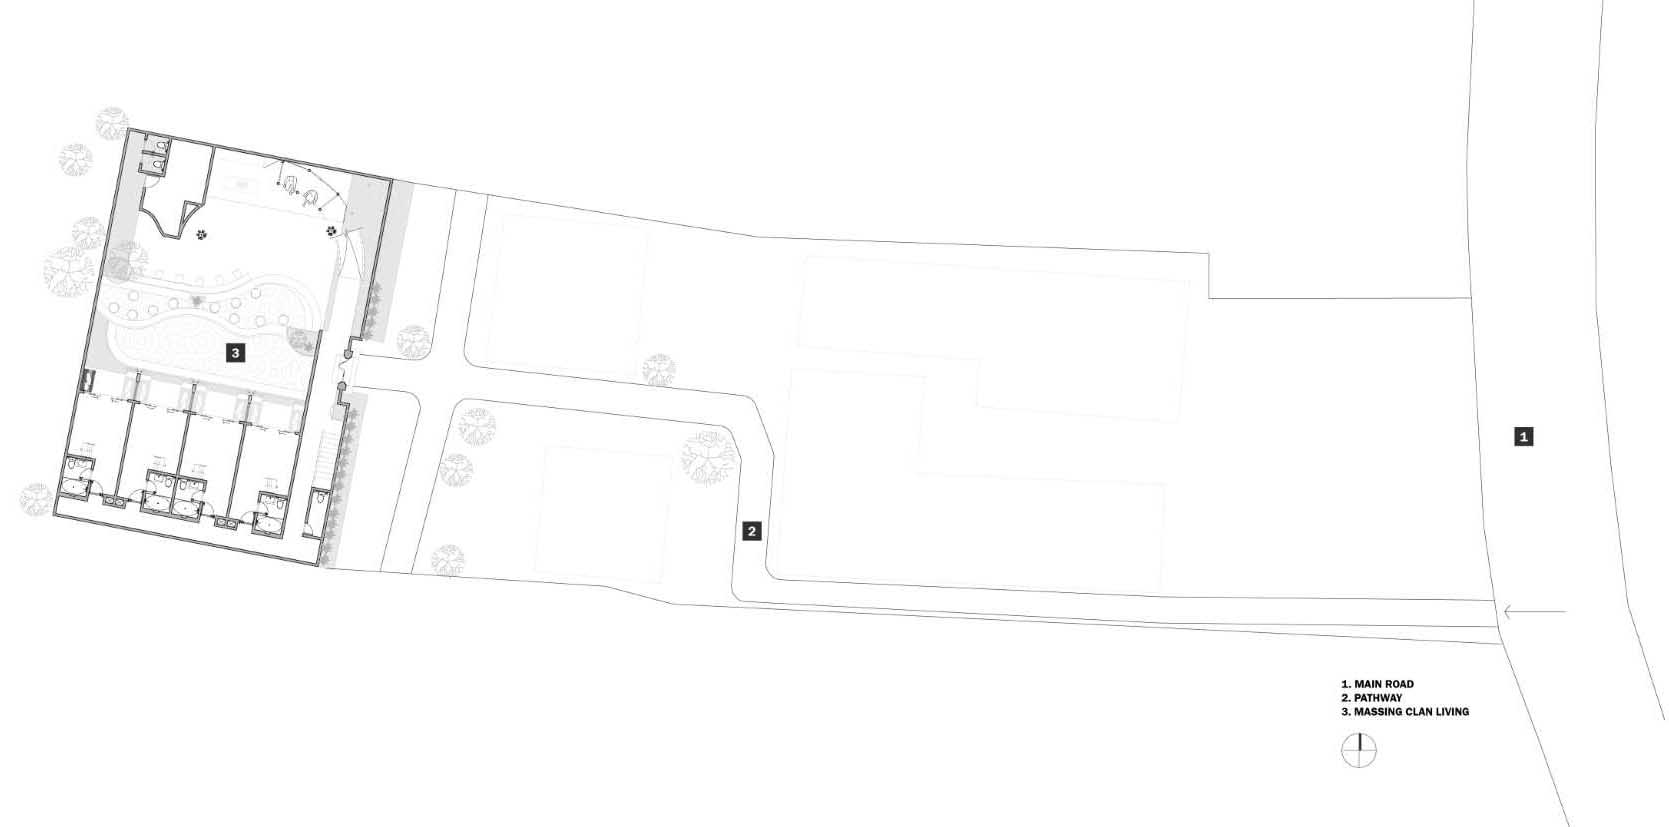 The site plan for a micro-living property.